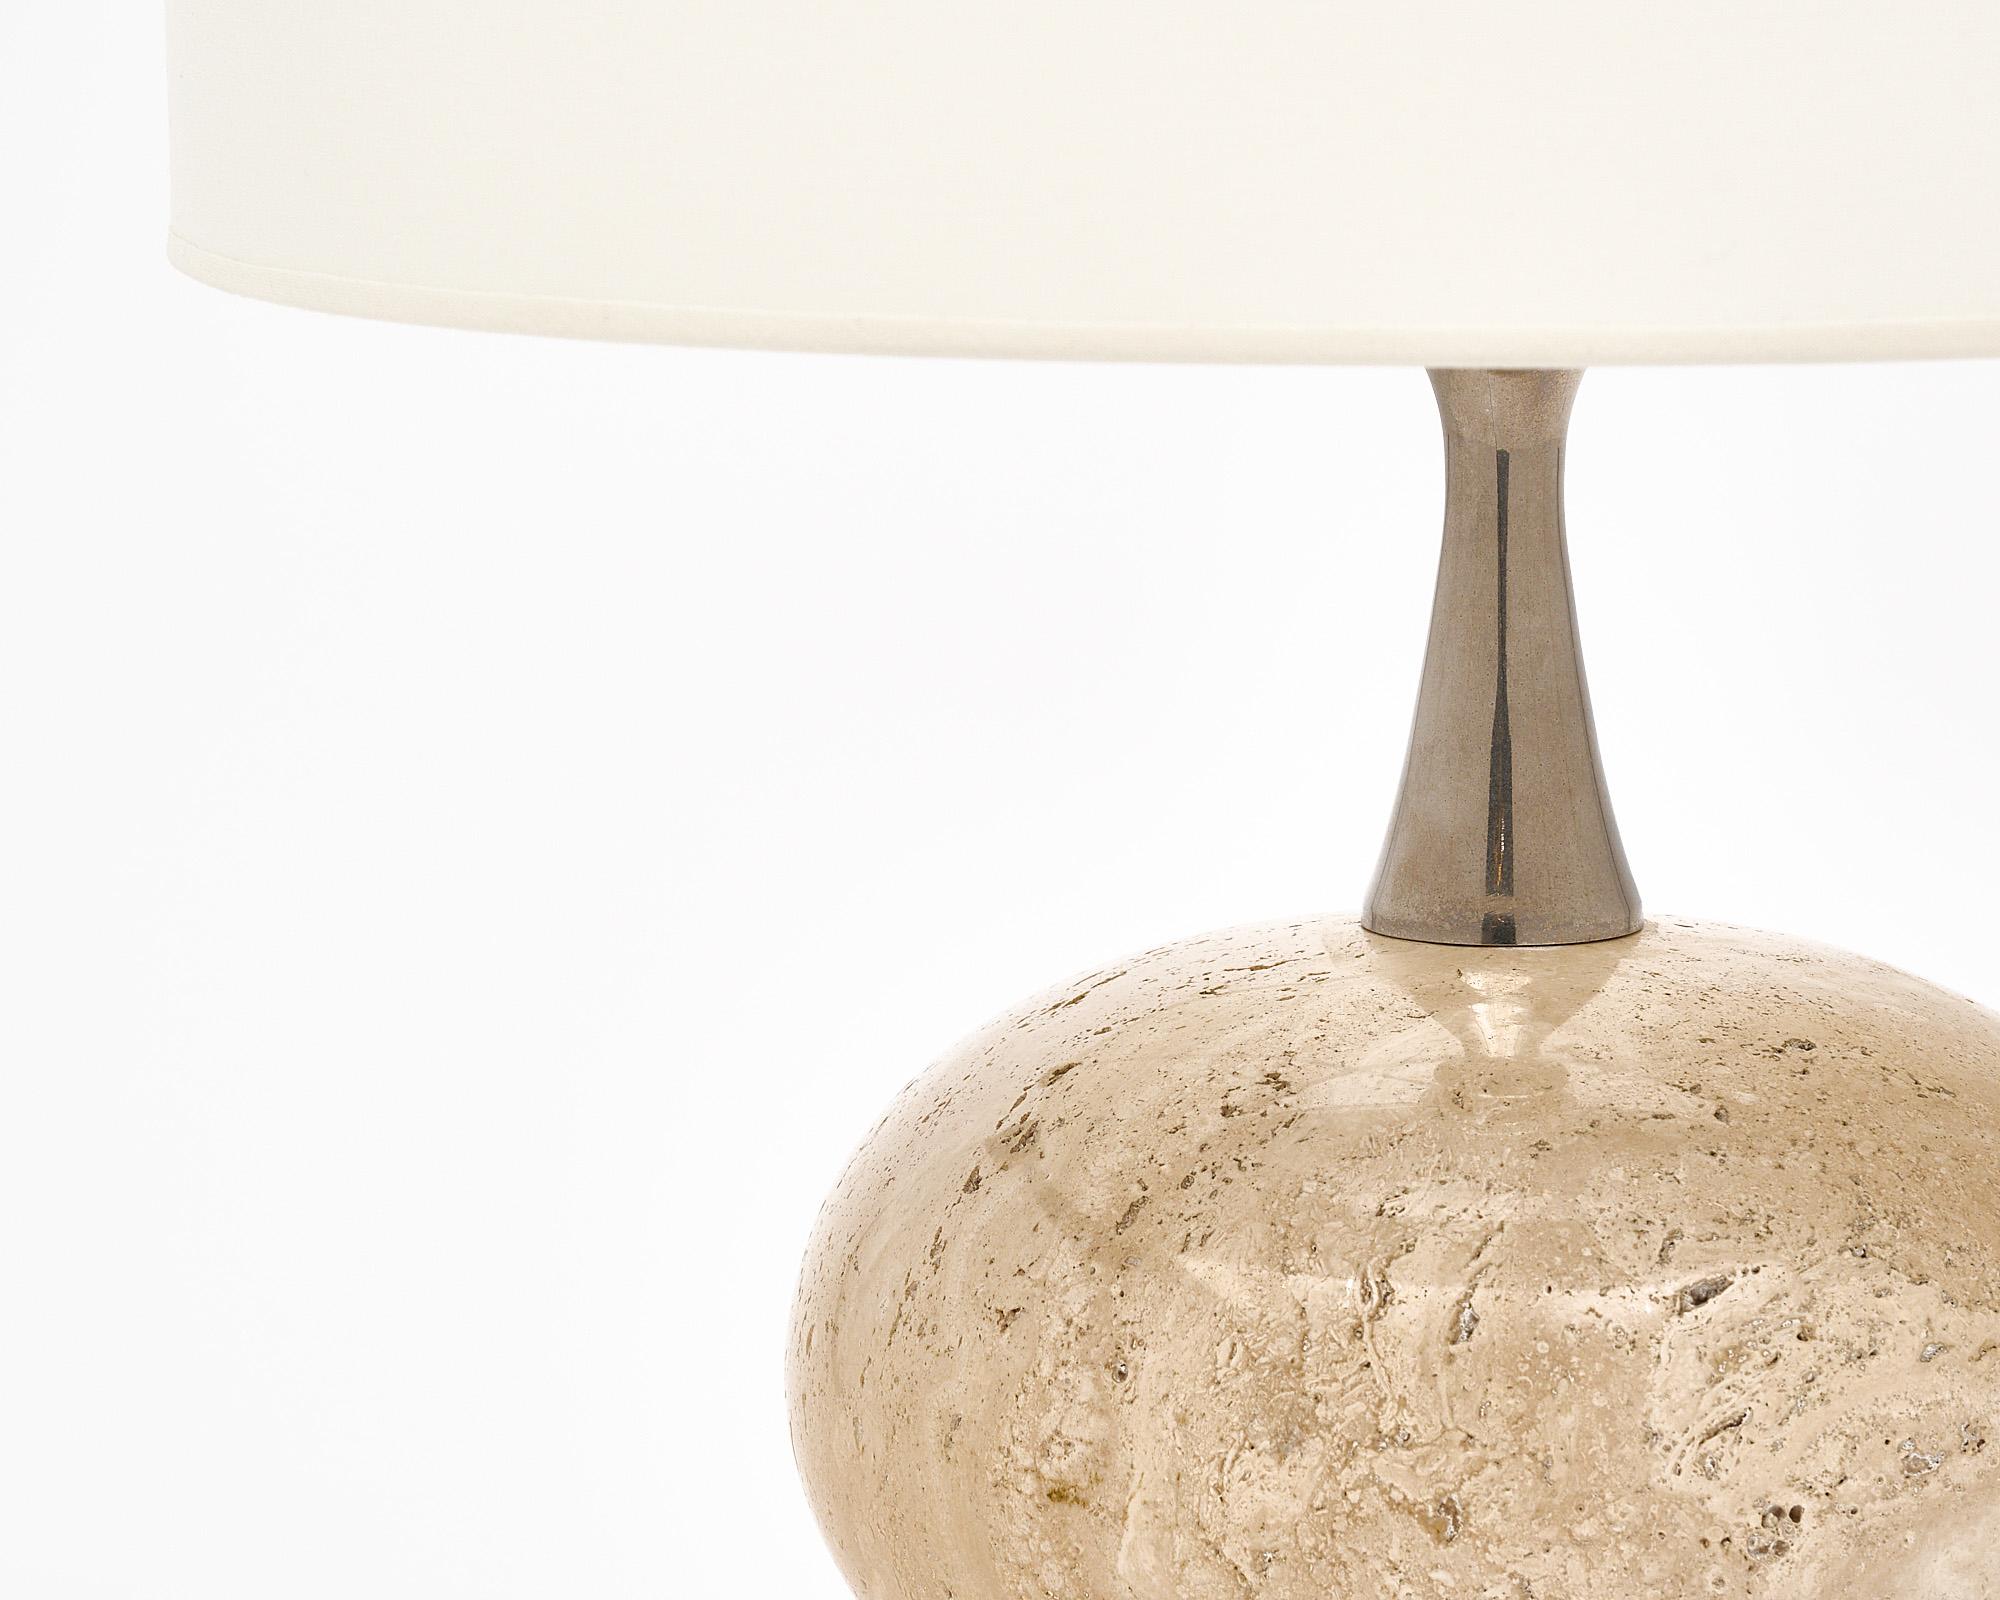 Table lamp made with a orb and base of “Travertin” marble connected with nickel components. The contemporary design is enhanced with the beautiful material this piece is crafted from. It has been newly wired to fit US standards. 
